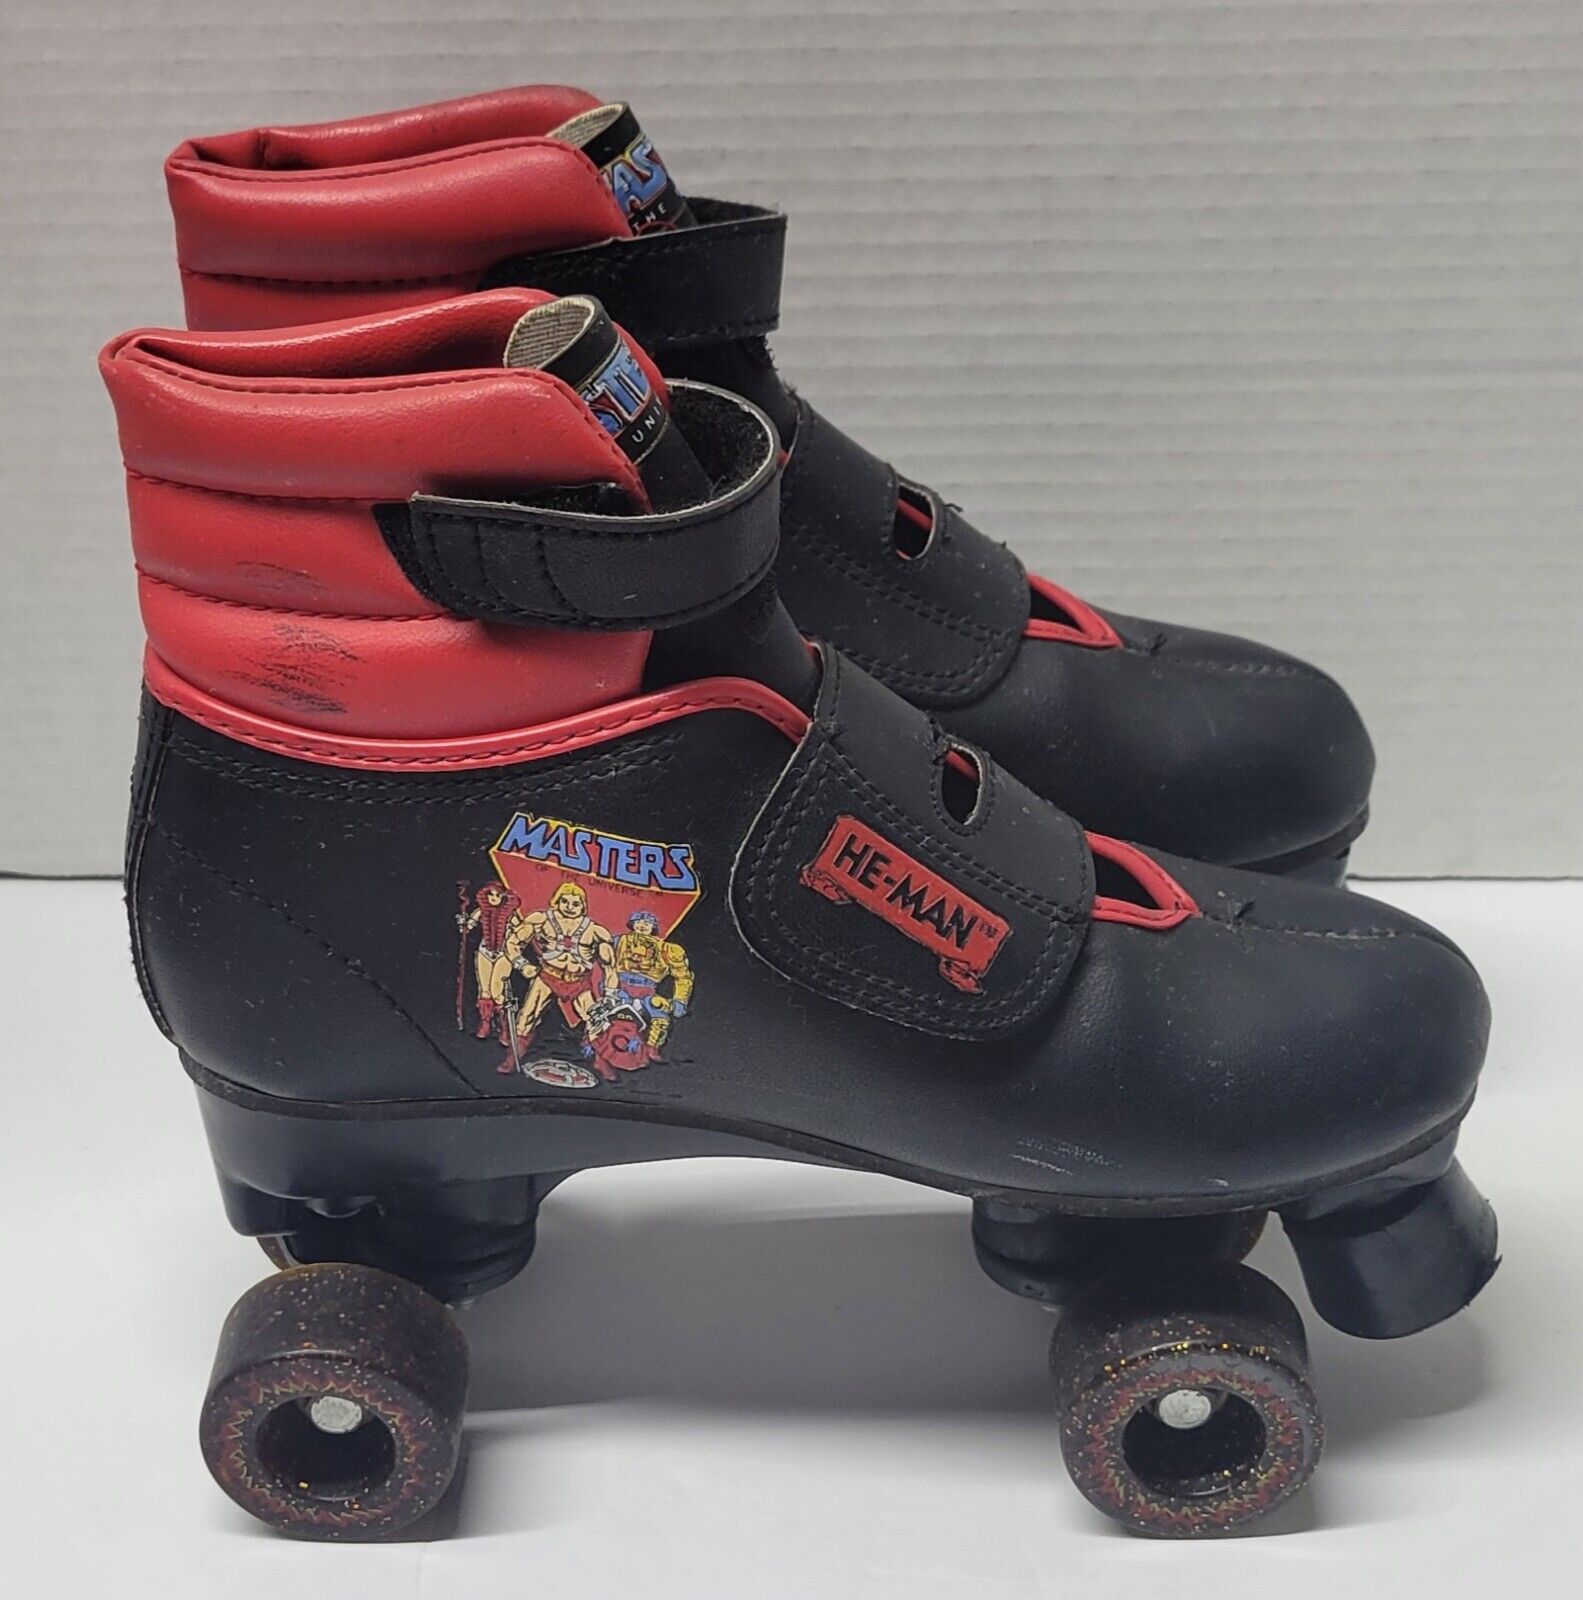 Vintage 1985 MOTU He-Man Masters of the Universe Childs Roller Skates Size 2